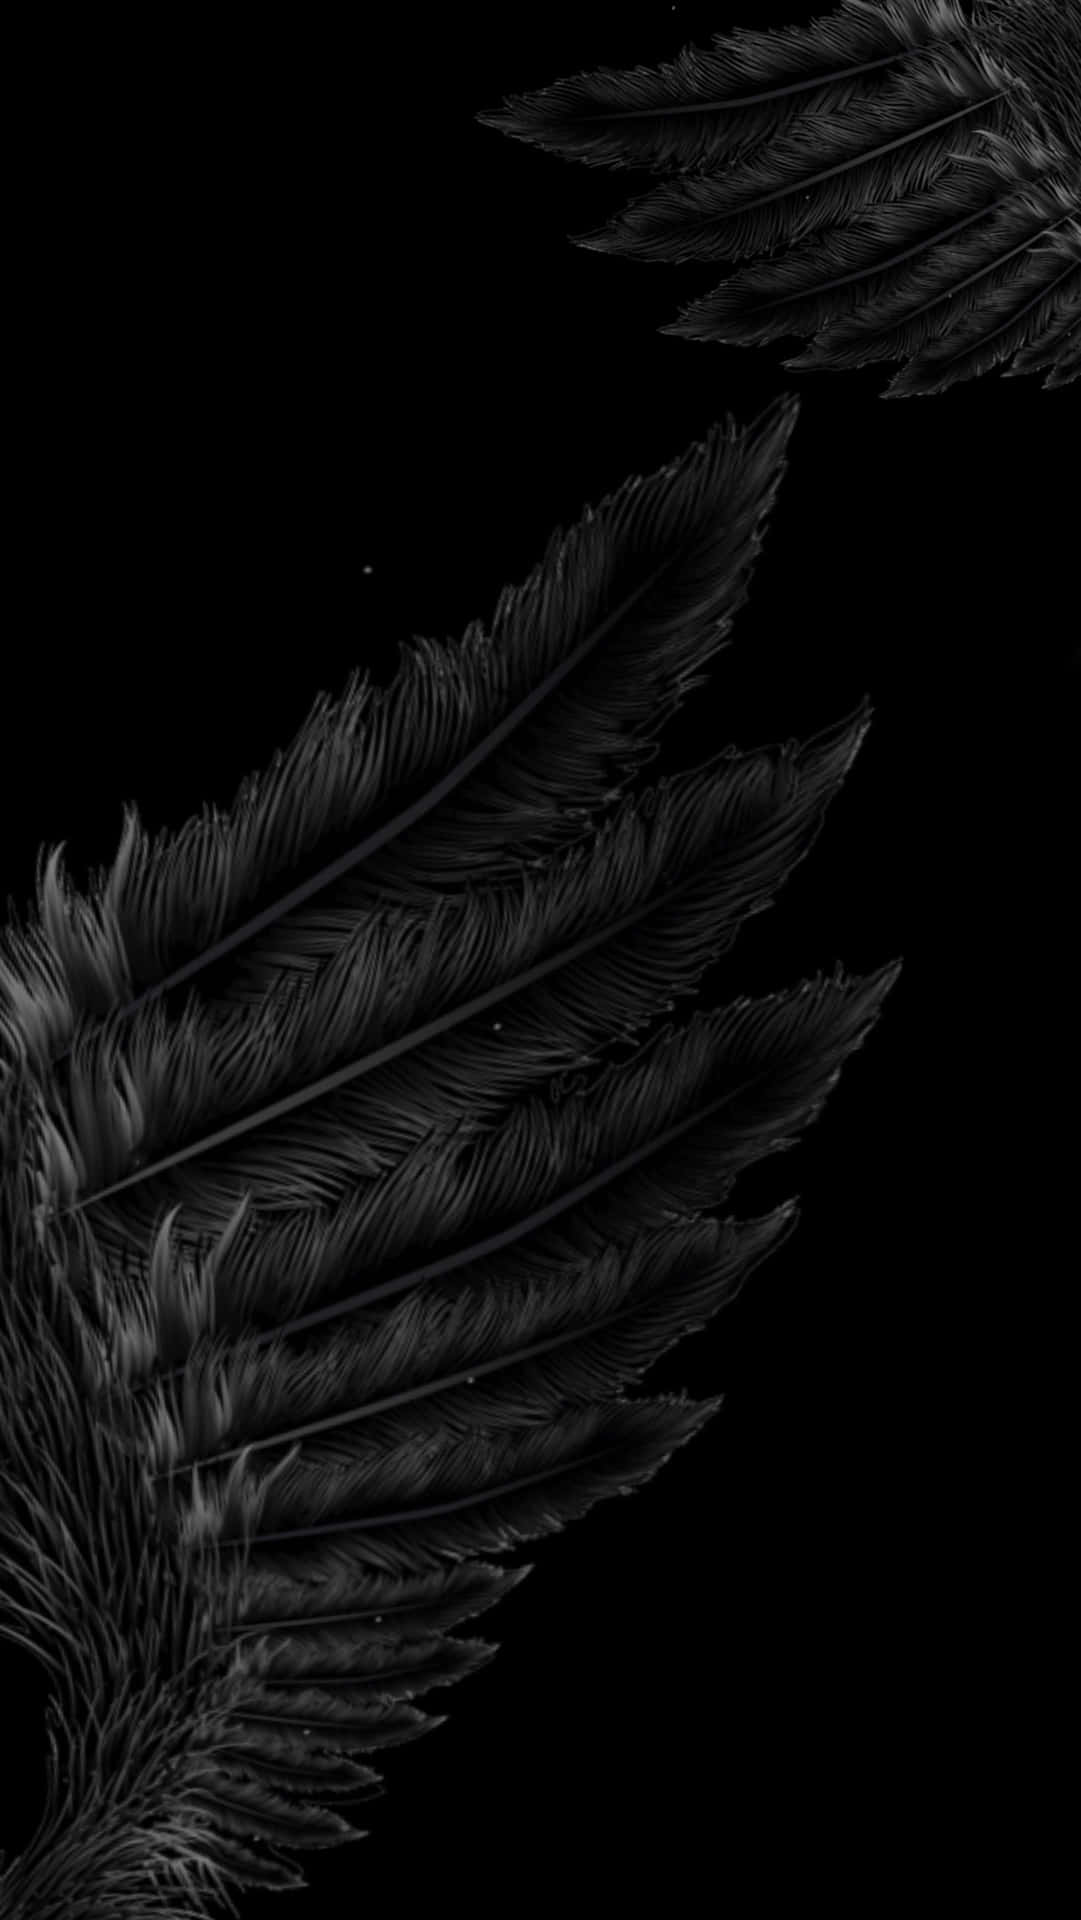 Feel the magical embrace of black angel wings.